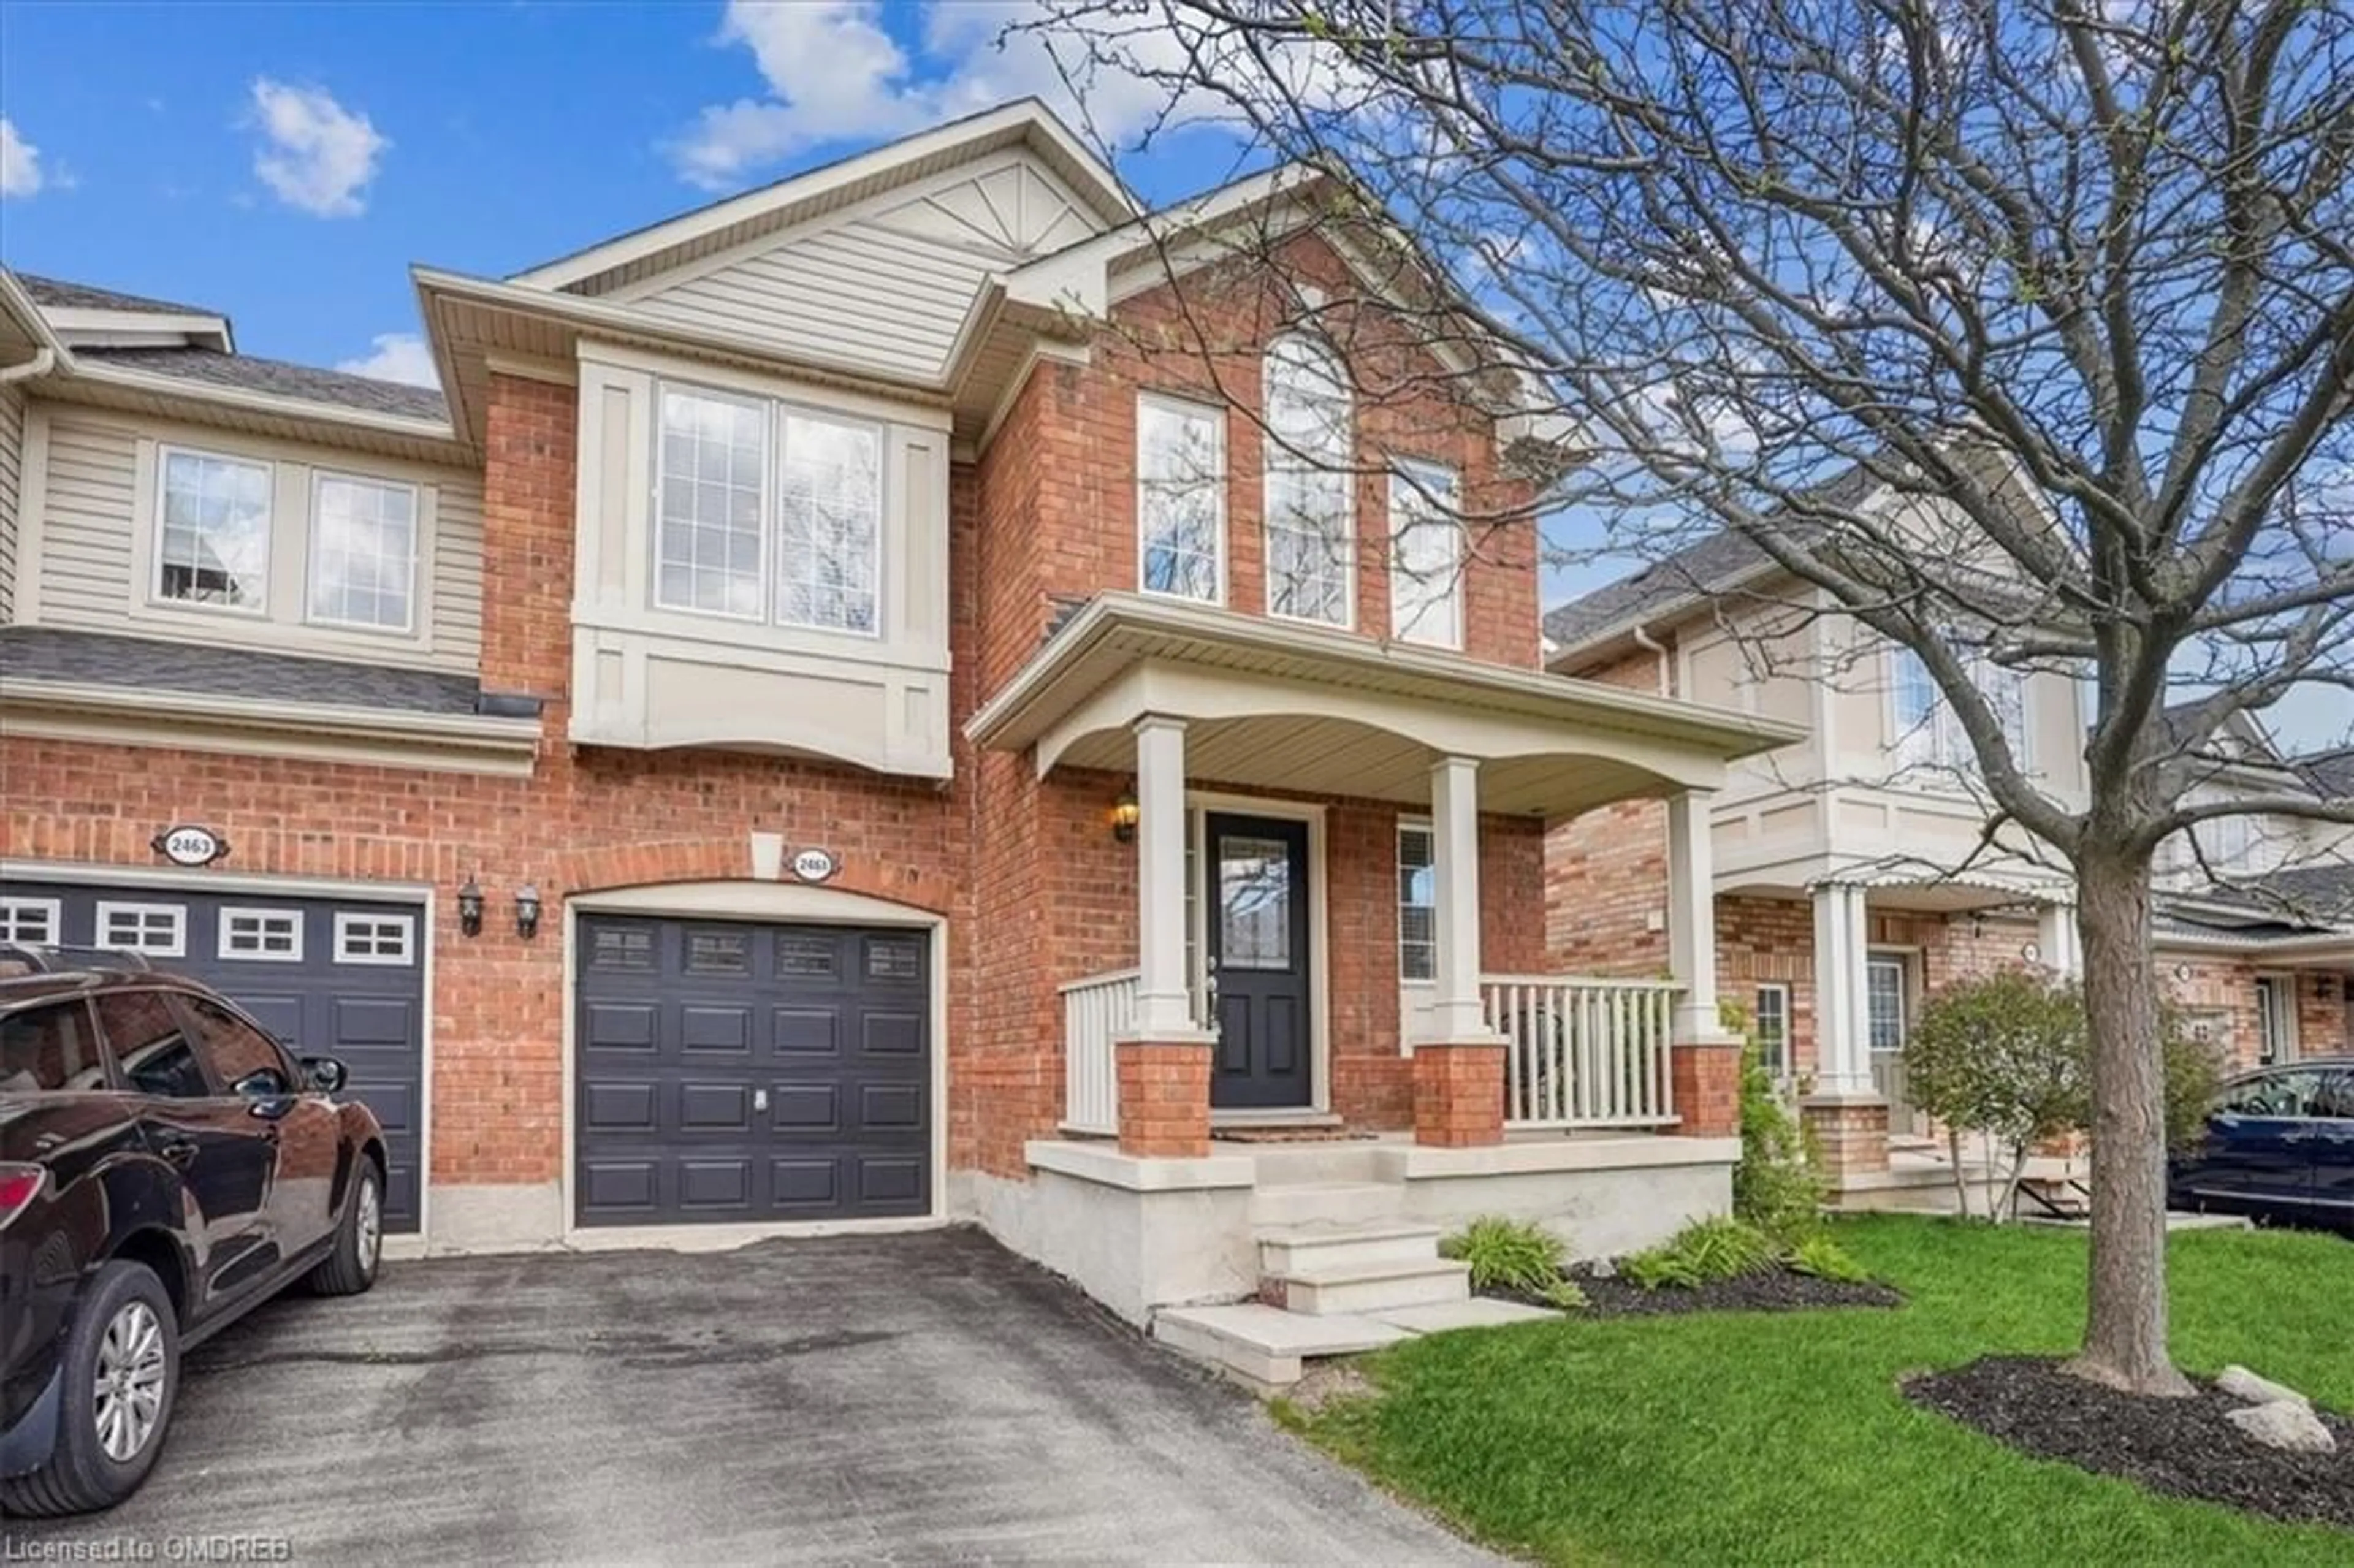 Home with brick exterior material for 2461 Springforest Dr, Oakville Ontario L6M 0A2